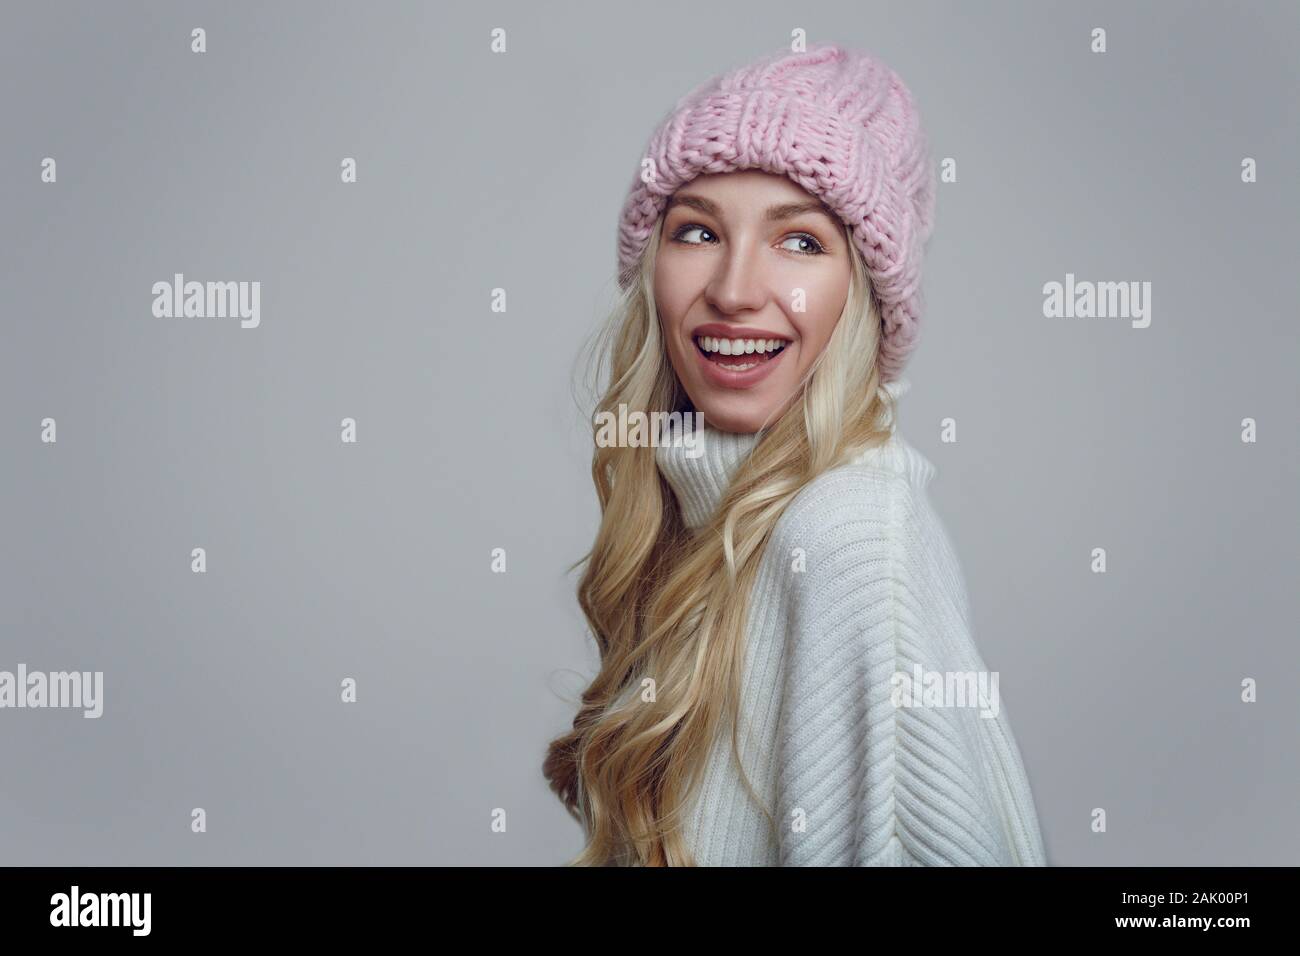 Happy young woman with long blond hair in pink knitted winter hat looking back over her shoulder with a beaming smile against a grey background Stock Photo